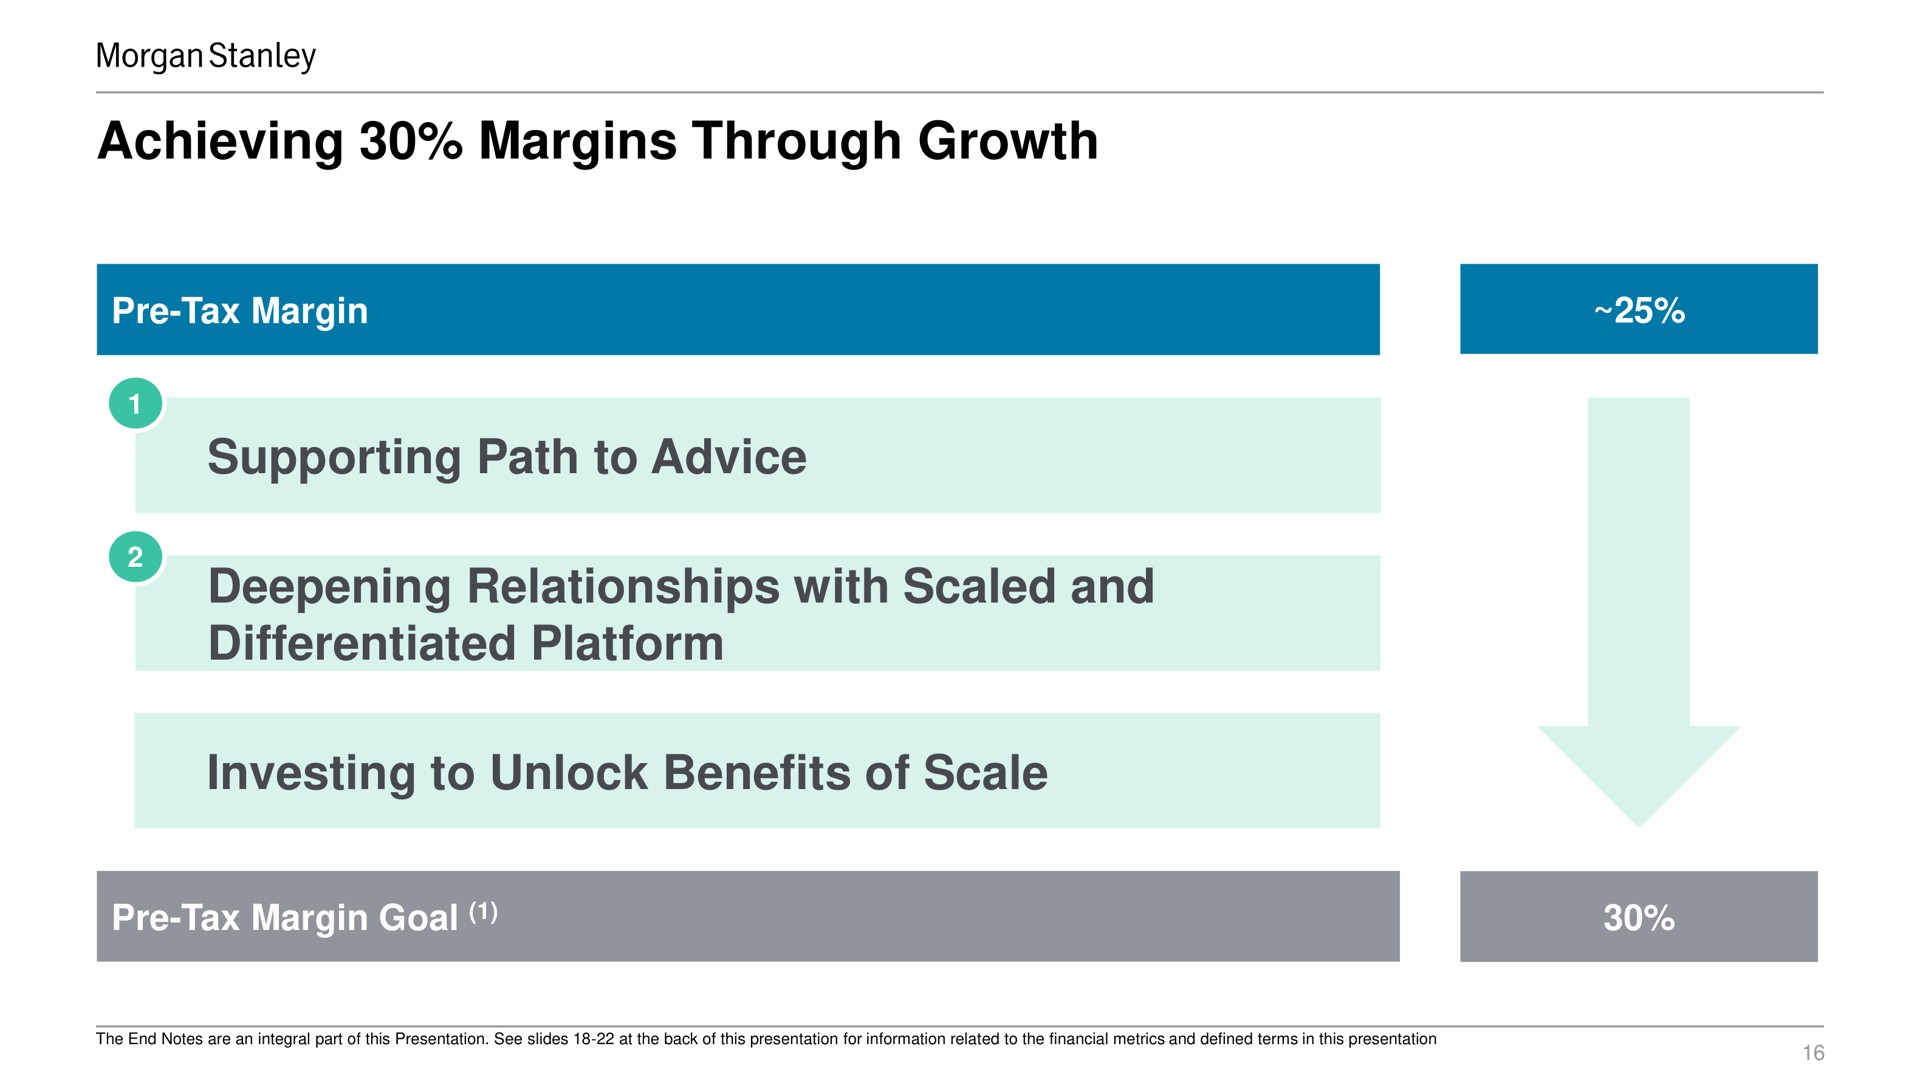 achieving margins through growth tax margin supporting path to advice deepening relationships with scaled and differentiated platform investing to unlock benefits of scale tax margin goal | Morgan Stanley